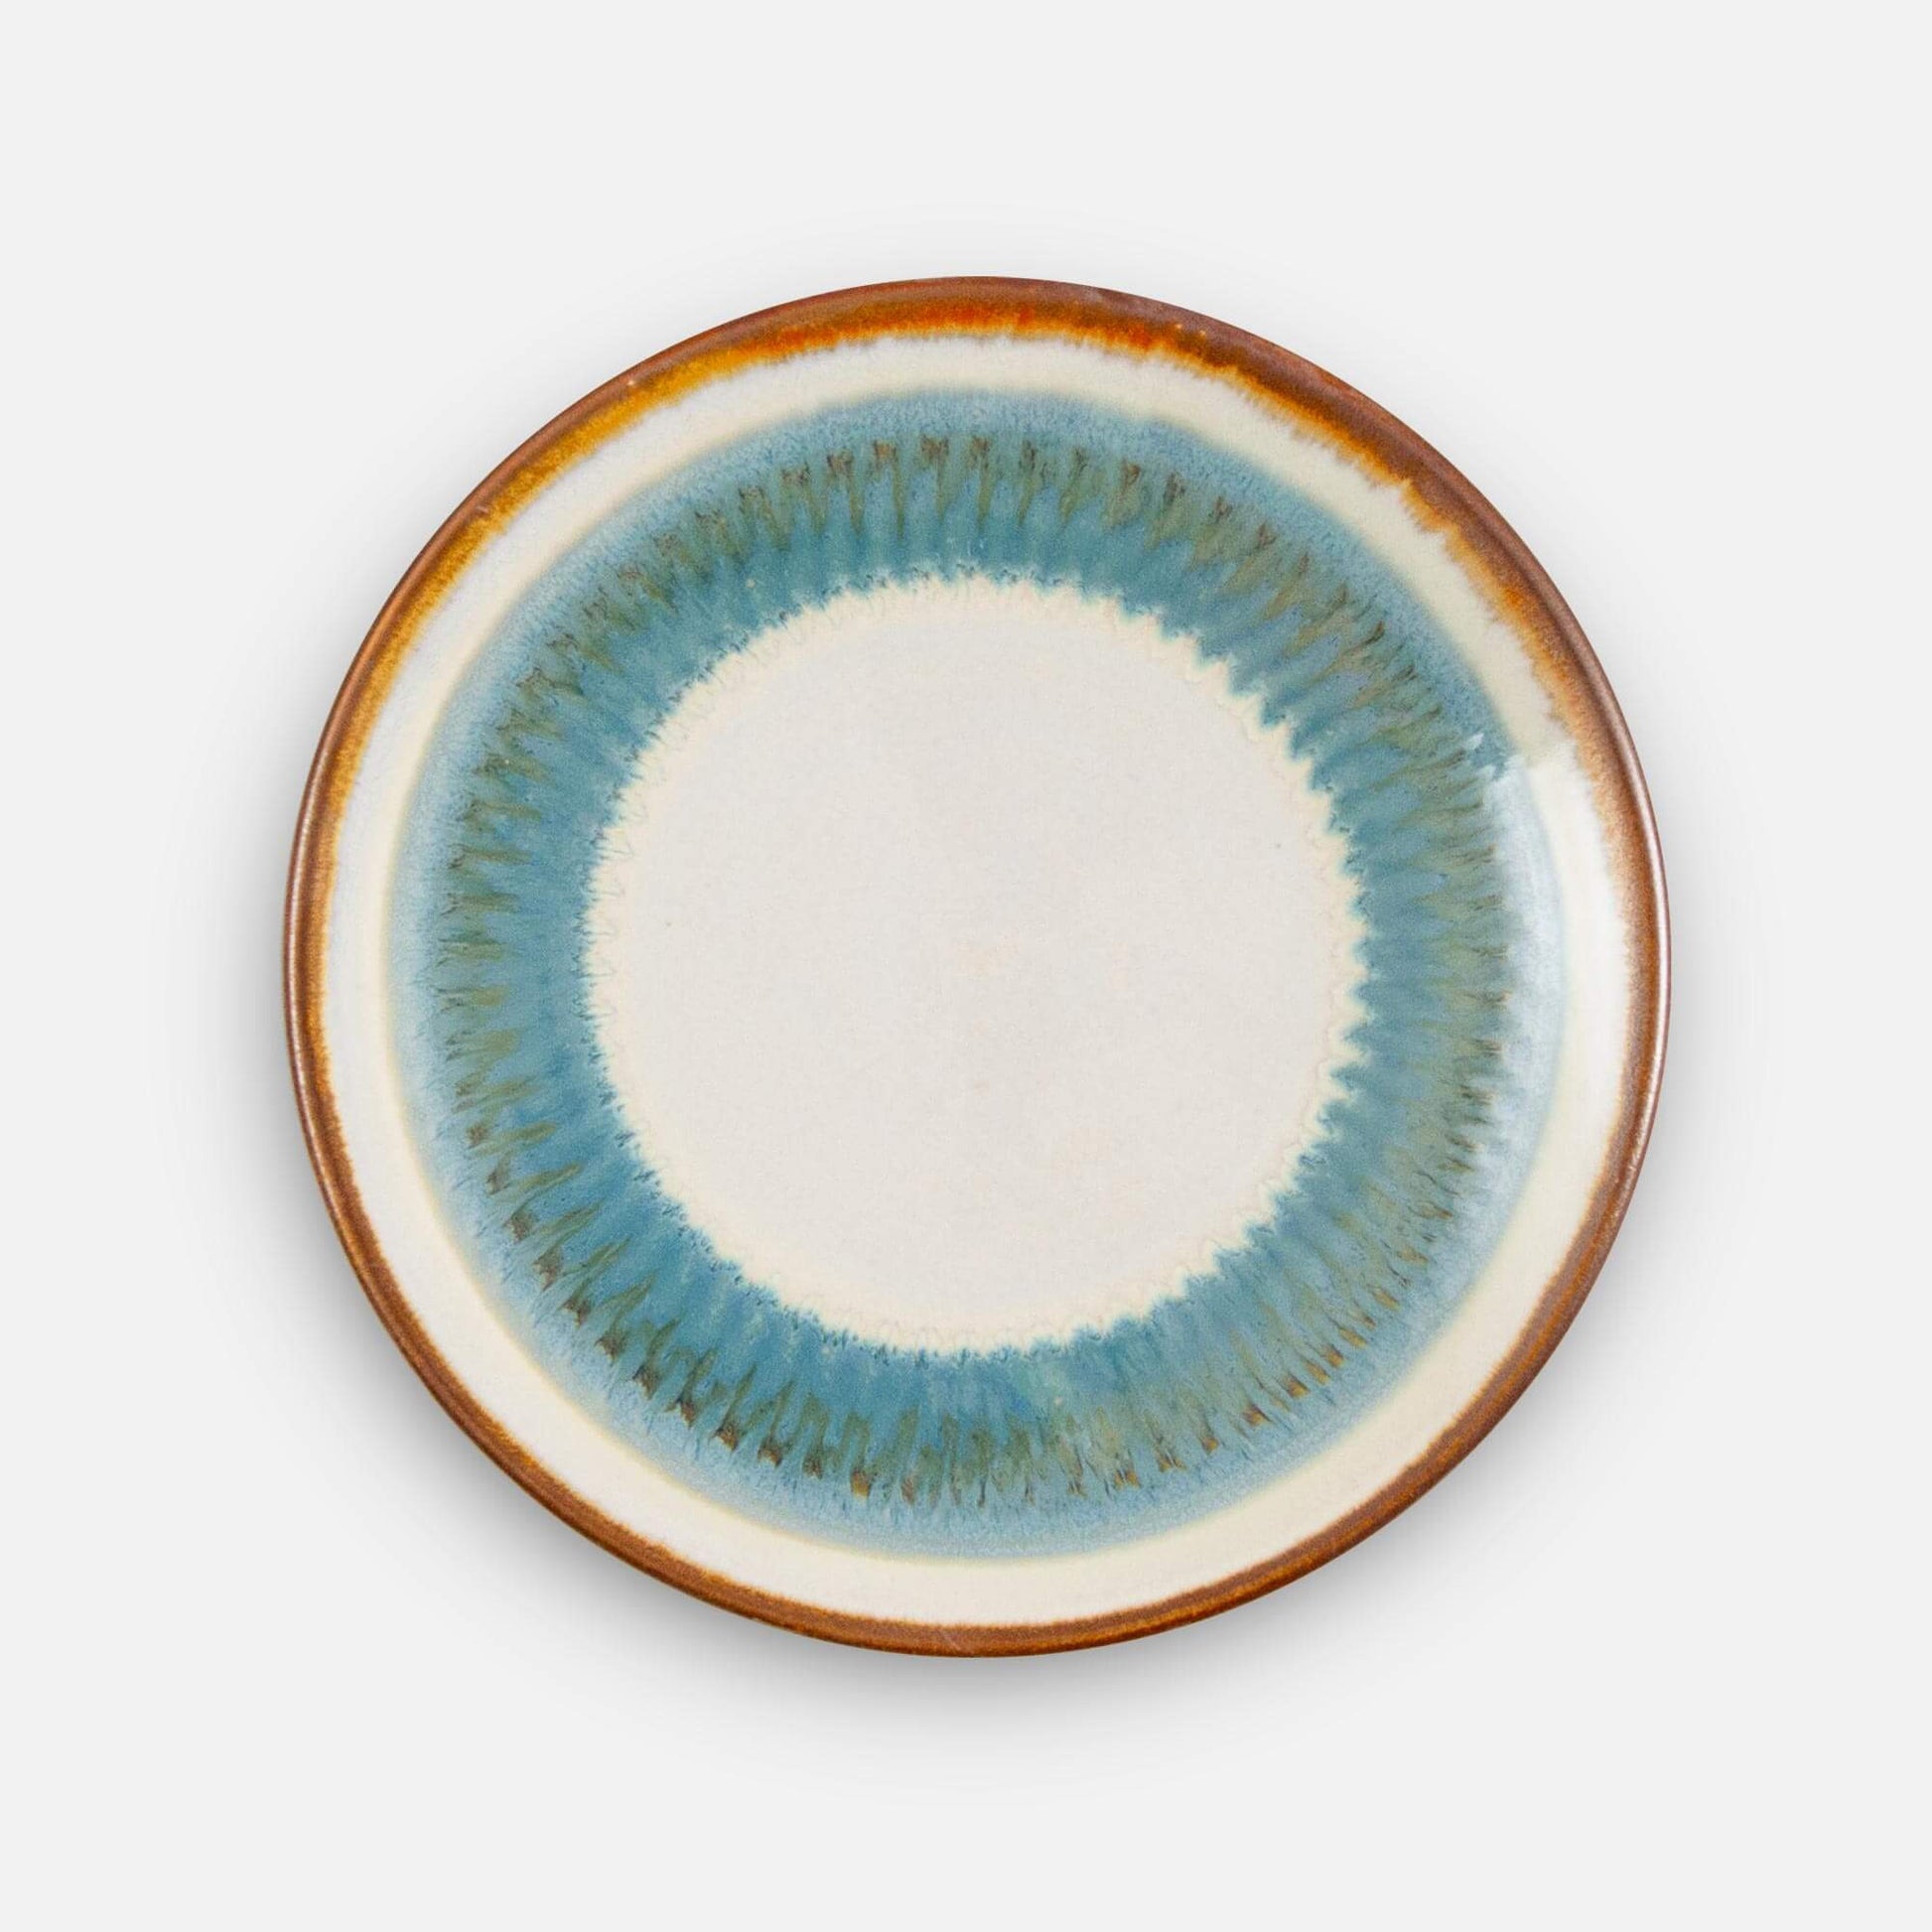 Handmade Pottery Classic Dessert Plate in Ivory & Blue pattern made by Georgetown Pottery in Maine